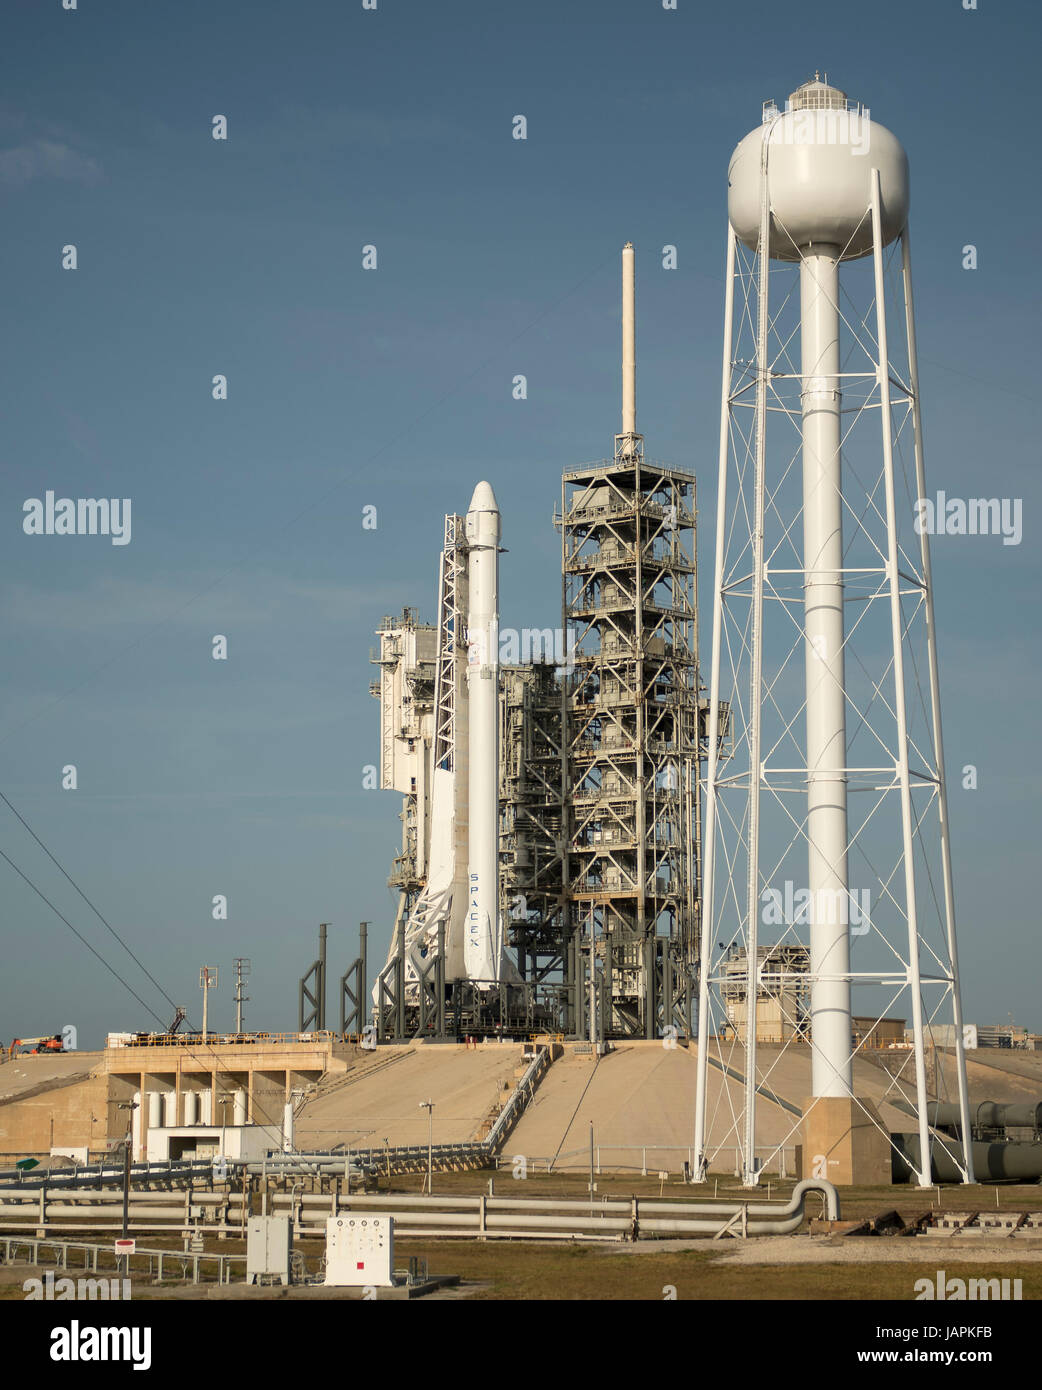 The SpaceX Falcon 9 rocket, with the Dragon spacecraft onboard, is seen shortly after being raised vertical at Launch Complex 39A at NASA·s Kennedy Space Center in Cape Canaveral, Florida, Thursday, June 1, 2017. Dragon is carrying almost 6,000 pounds of science research, crew supplies and hardware to the International Space Station in support of the Expedition 52 and 53 crew members. The unpressurized trunk of the spacecraft also will transport solar panels, tools for Earth-observation and equipment to study neutron stars. This will be the 100th launch, and sixth SpaceX launch, from this pad. Stock Photo